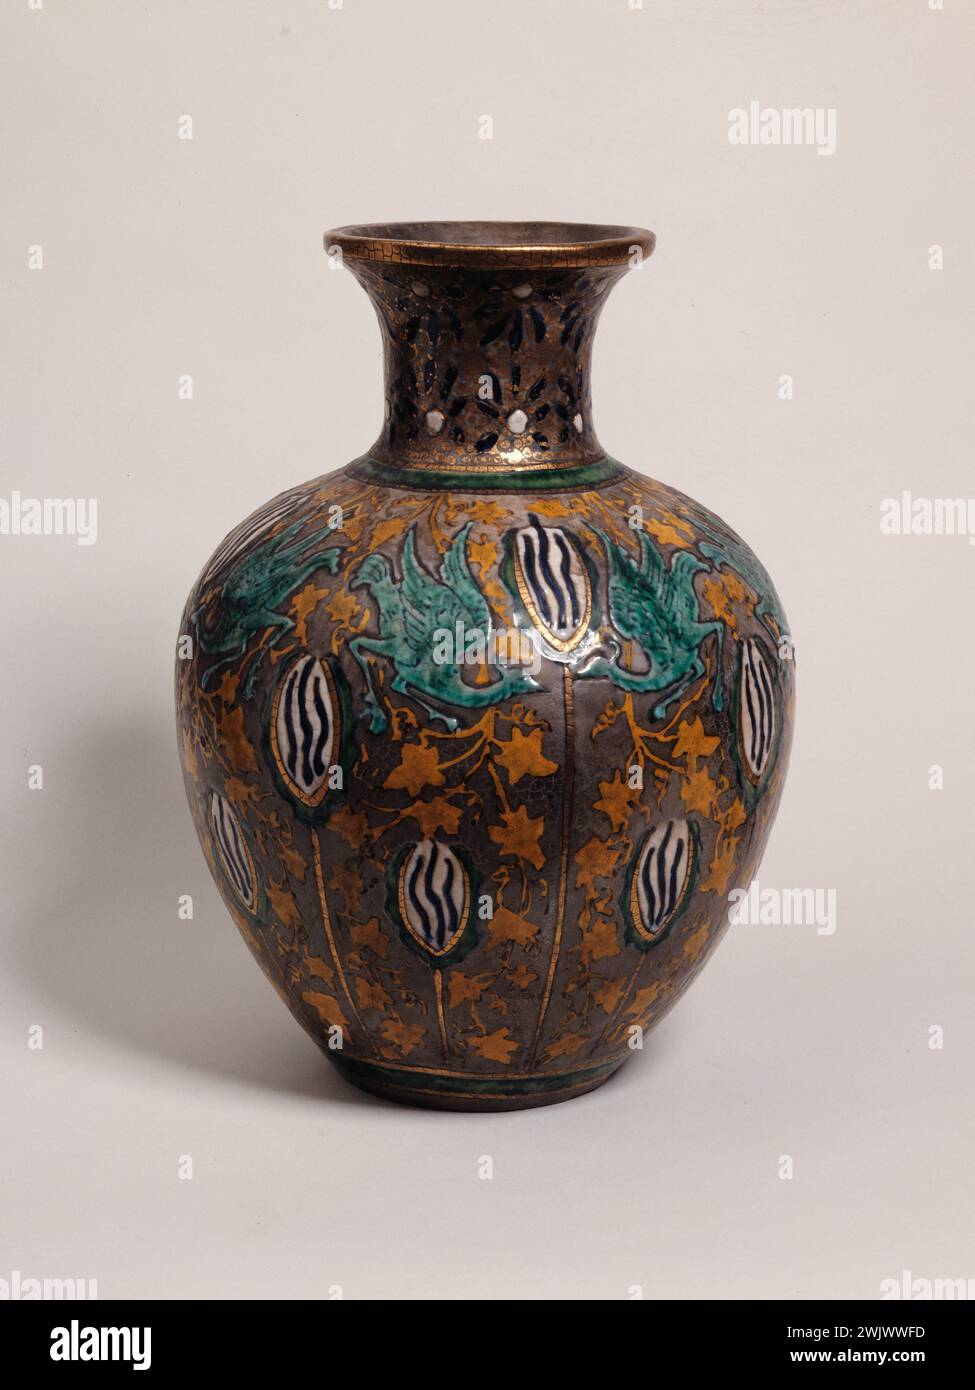 André Metthey (1871-1920). Vase. Earthenware. Museum of Fine Arts of the City of Paris, Petit Palais. Art Menager, Dragon, Faience, object of decoration, vase, 19th 19th 19th 19 19th 19th century Stock Photo